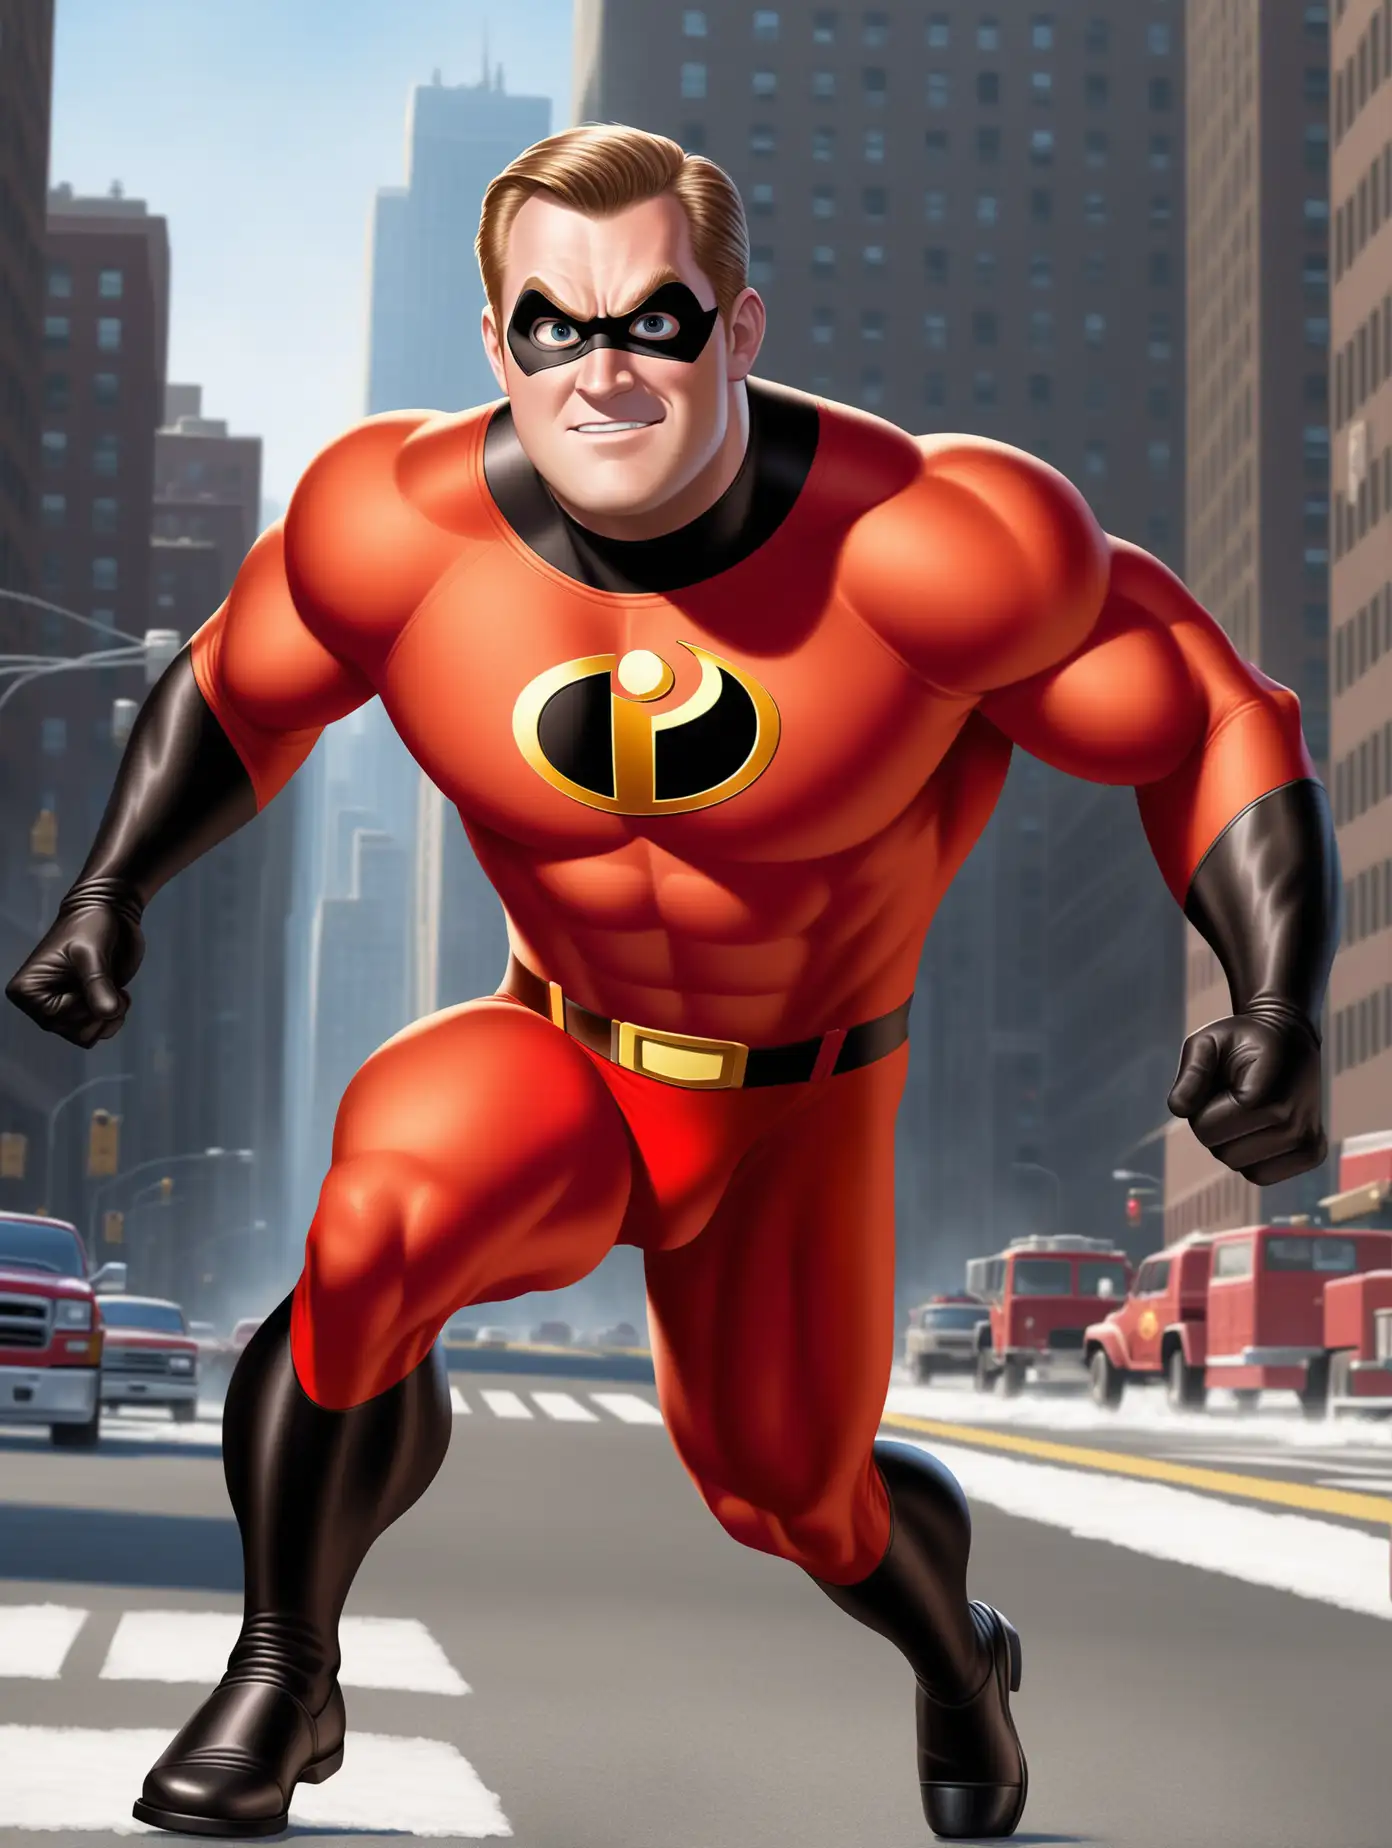 Mr. Incredible (the incredibles) in live action, realistic digital art, face of realistic, face of realistic, hyper realistic

